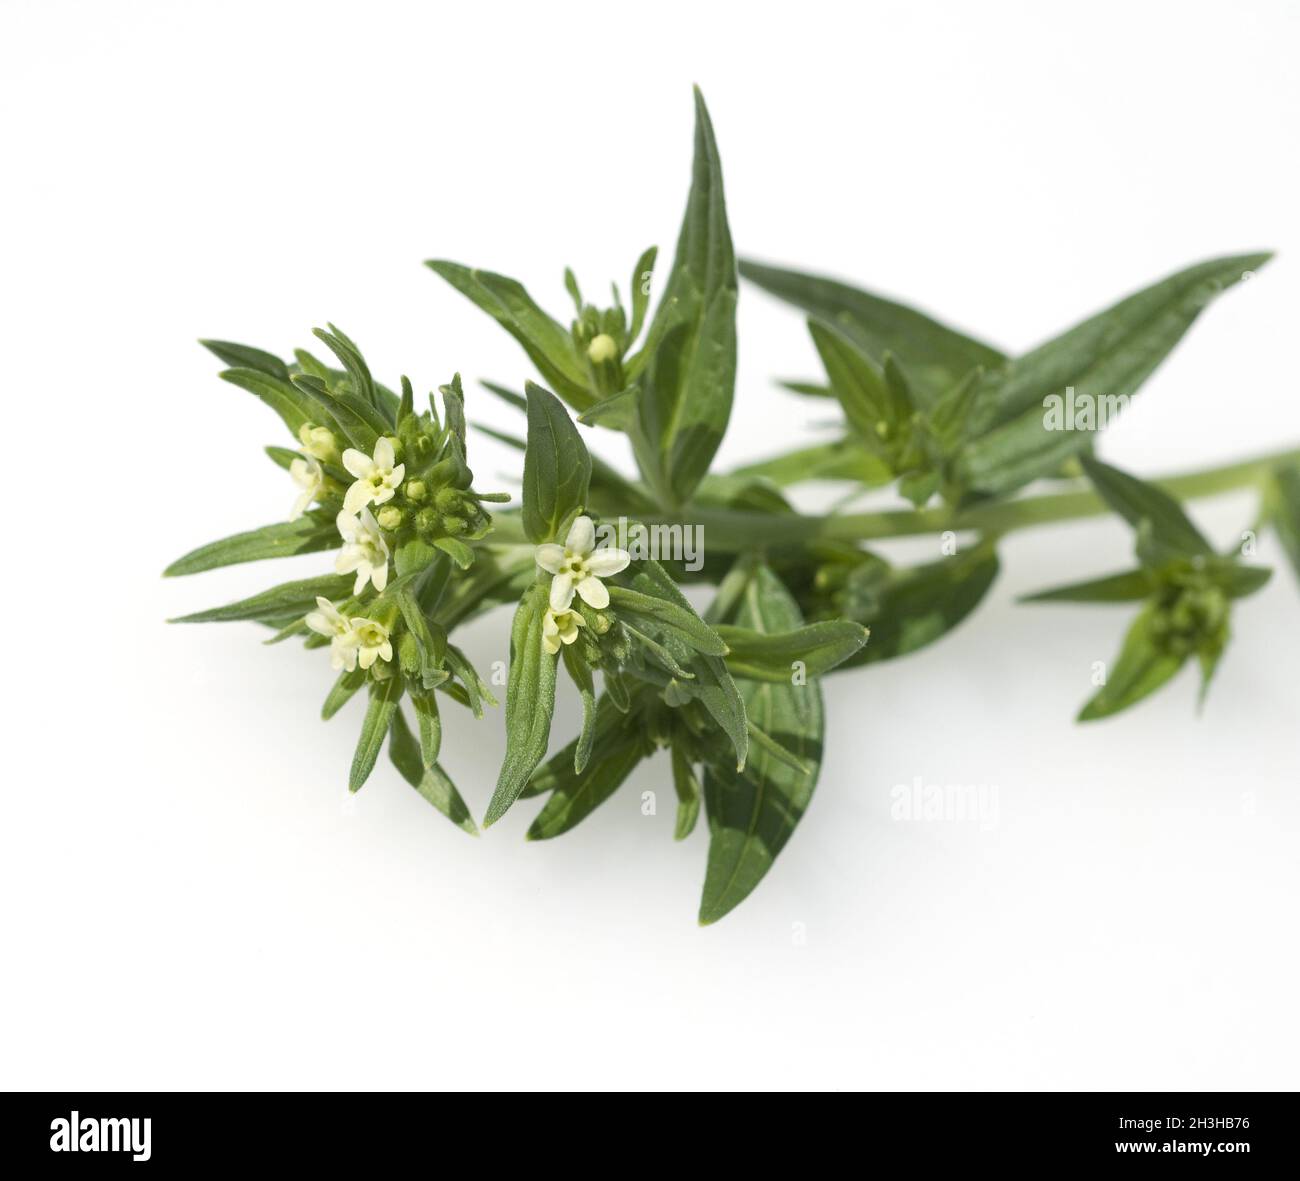 Stone seed, true stone seed, Lithospermum Officinale Stock Photo